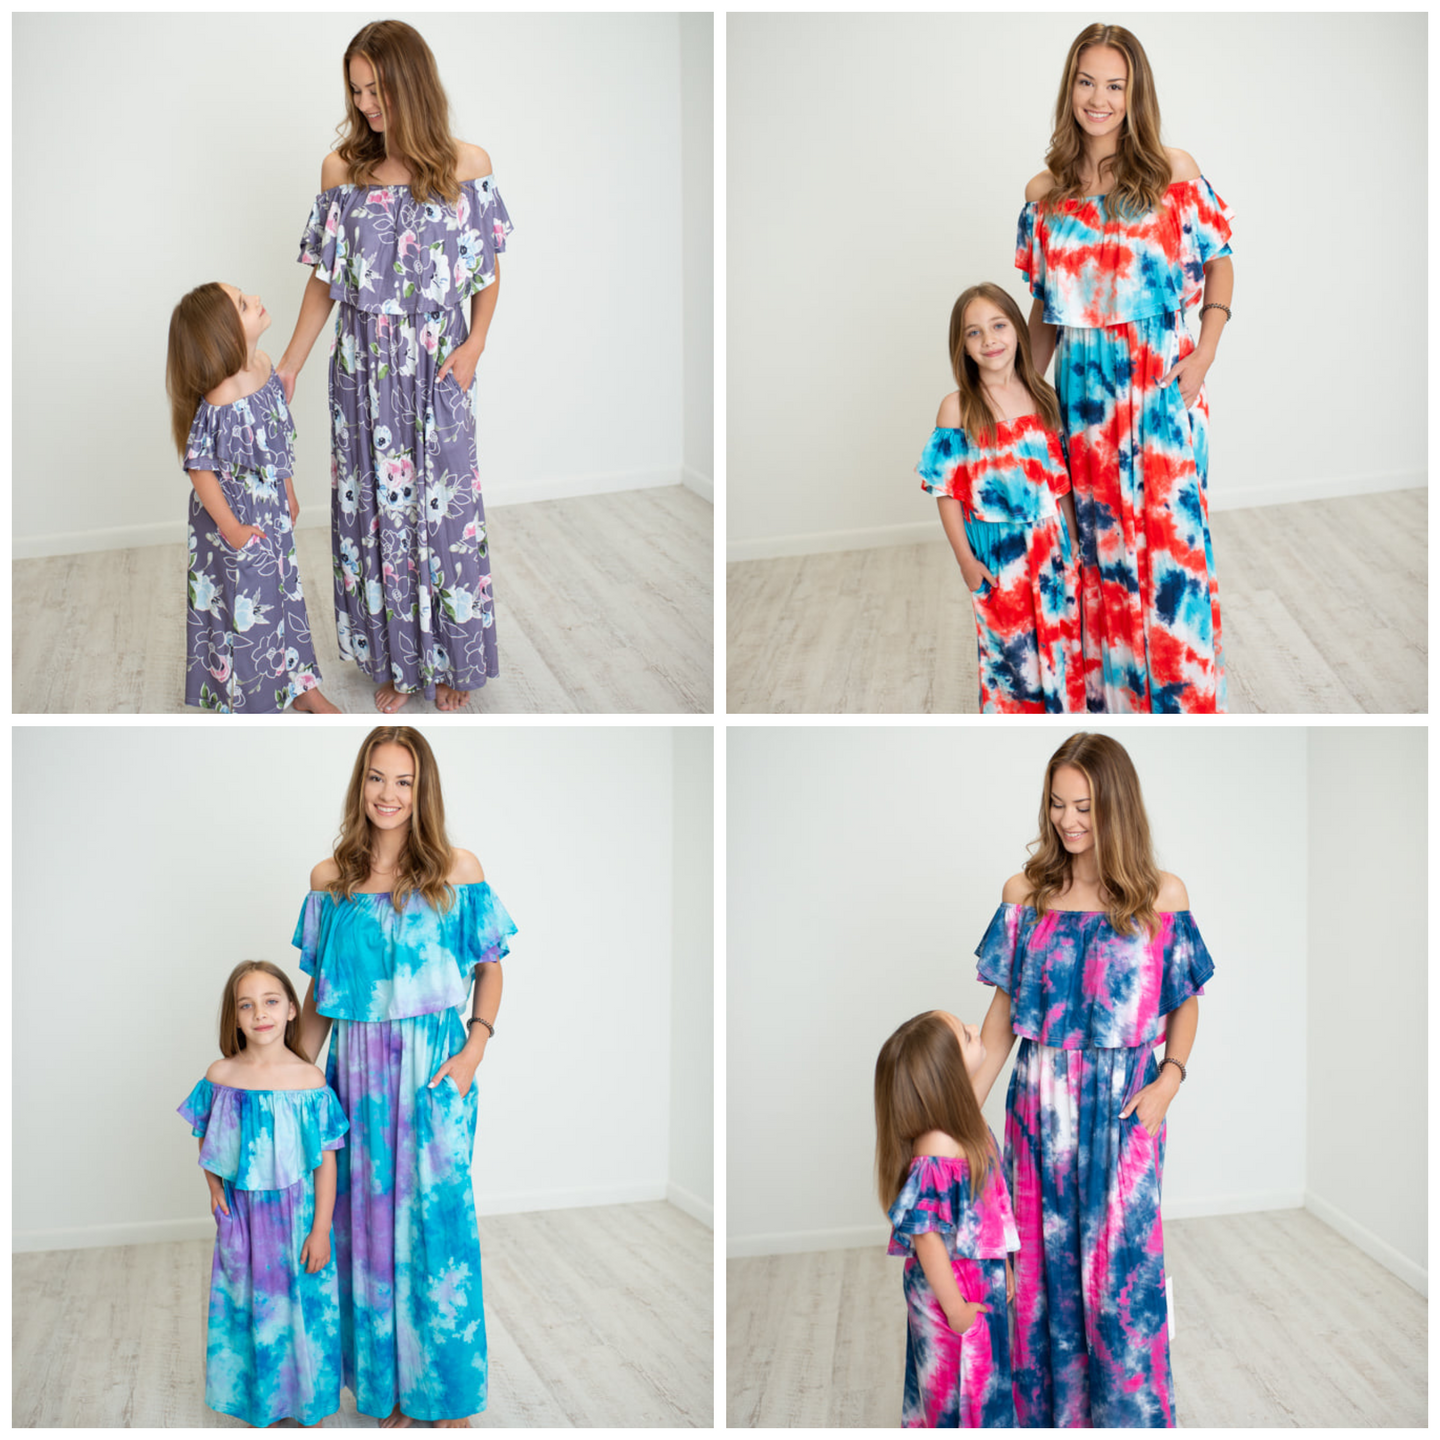 OFF THE SHOULDER MAXI DRESSES (CAN BE WORN ON SHOULDERS)